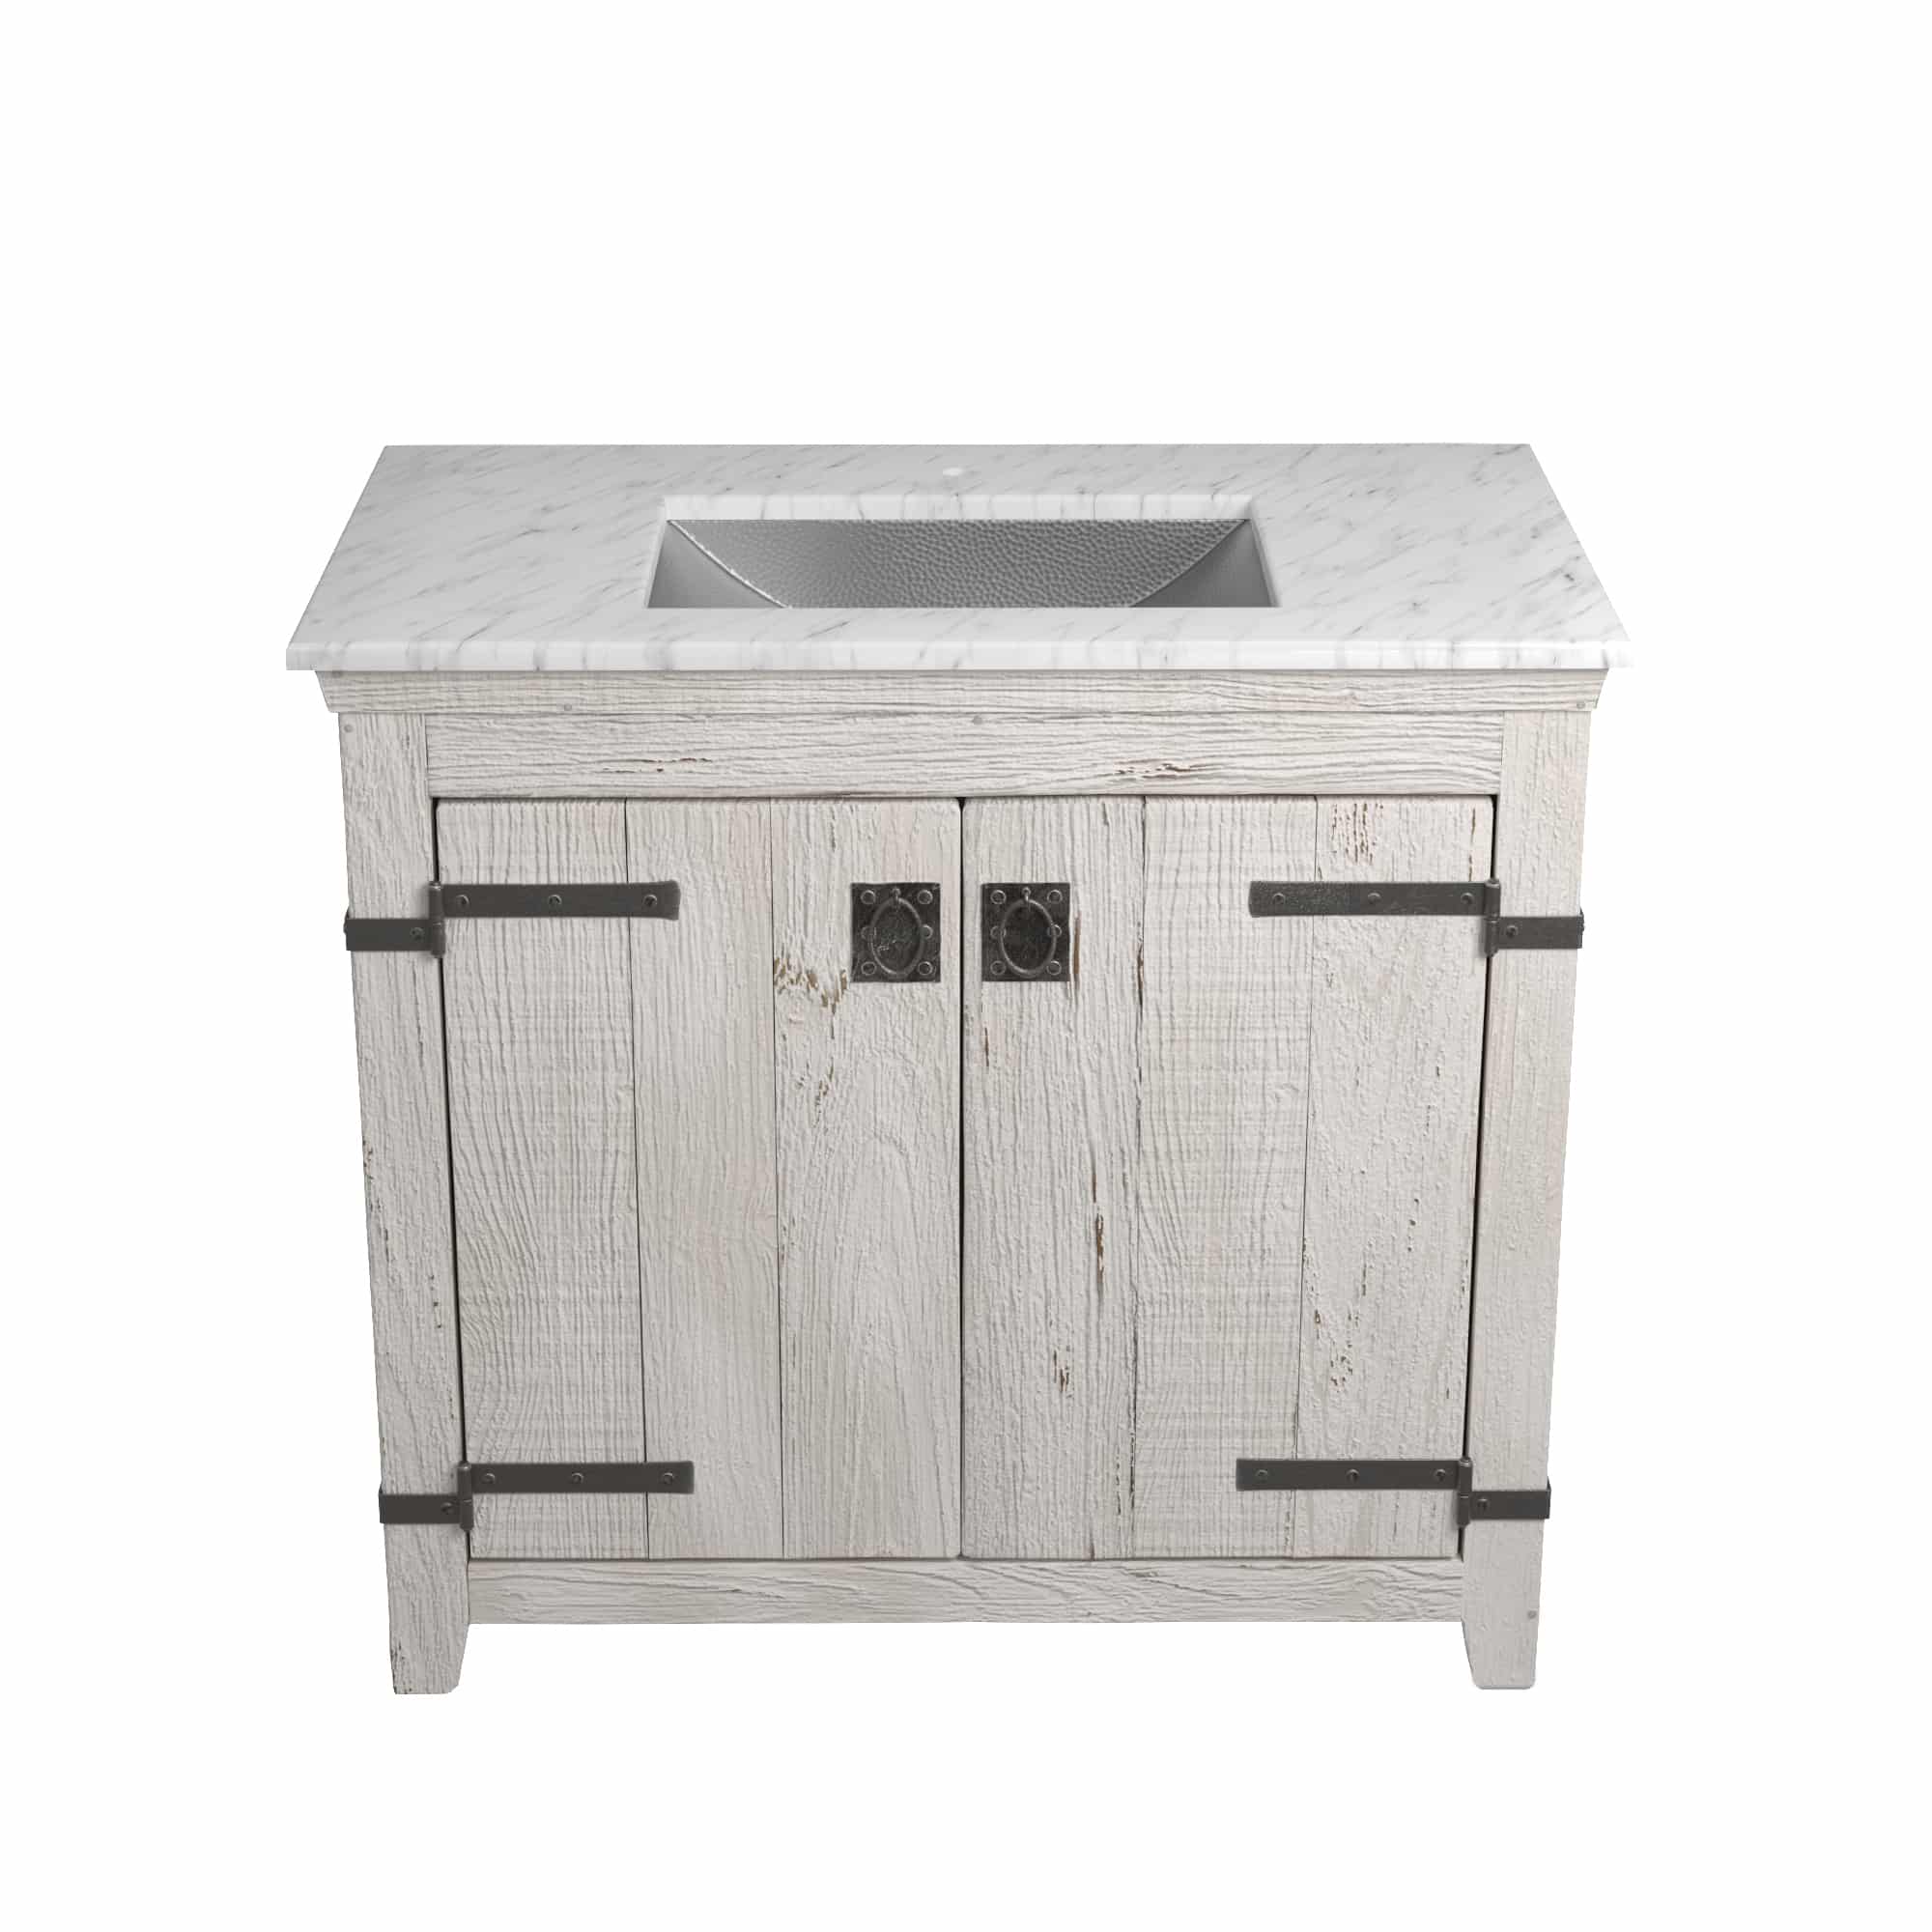 Native Trails 36" Americana Vanity in Whitewash with Carrara Marble Top and Avila in Brushed Nickel, Single Faucet Hole, BND36-VB-CT-CP-017